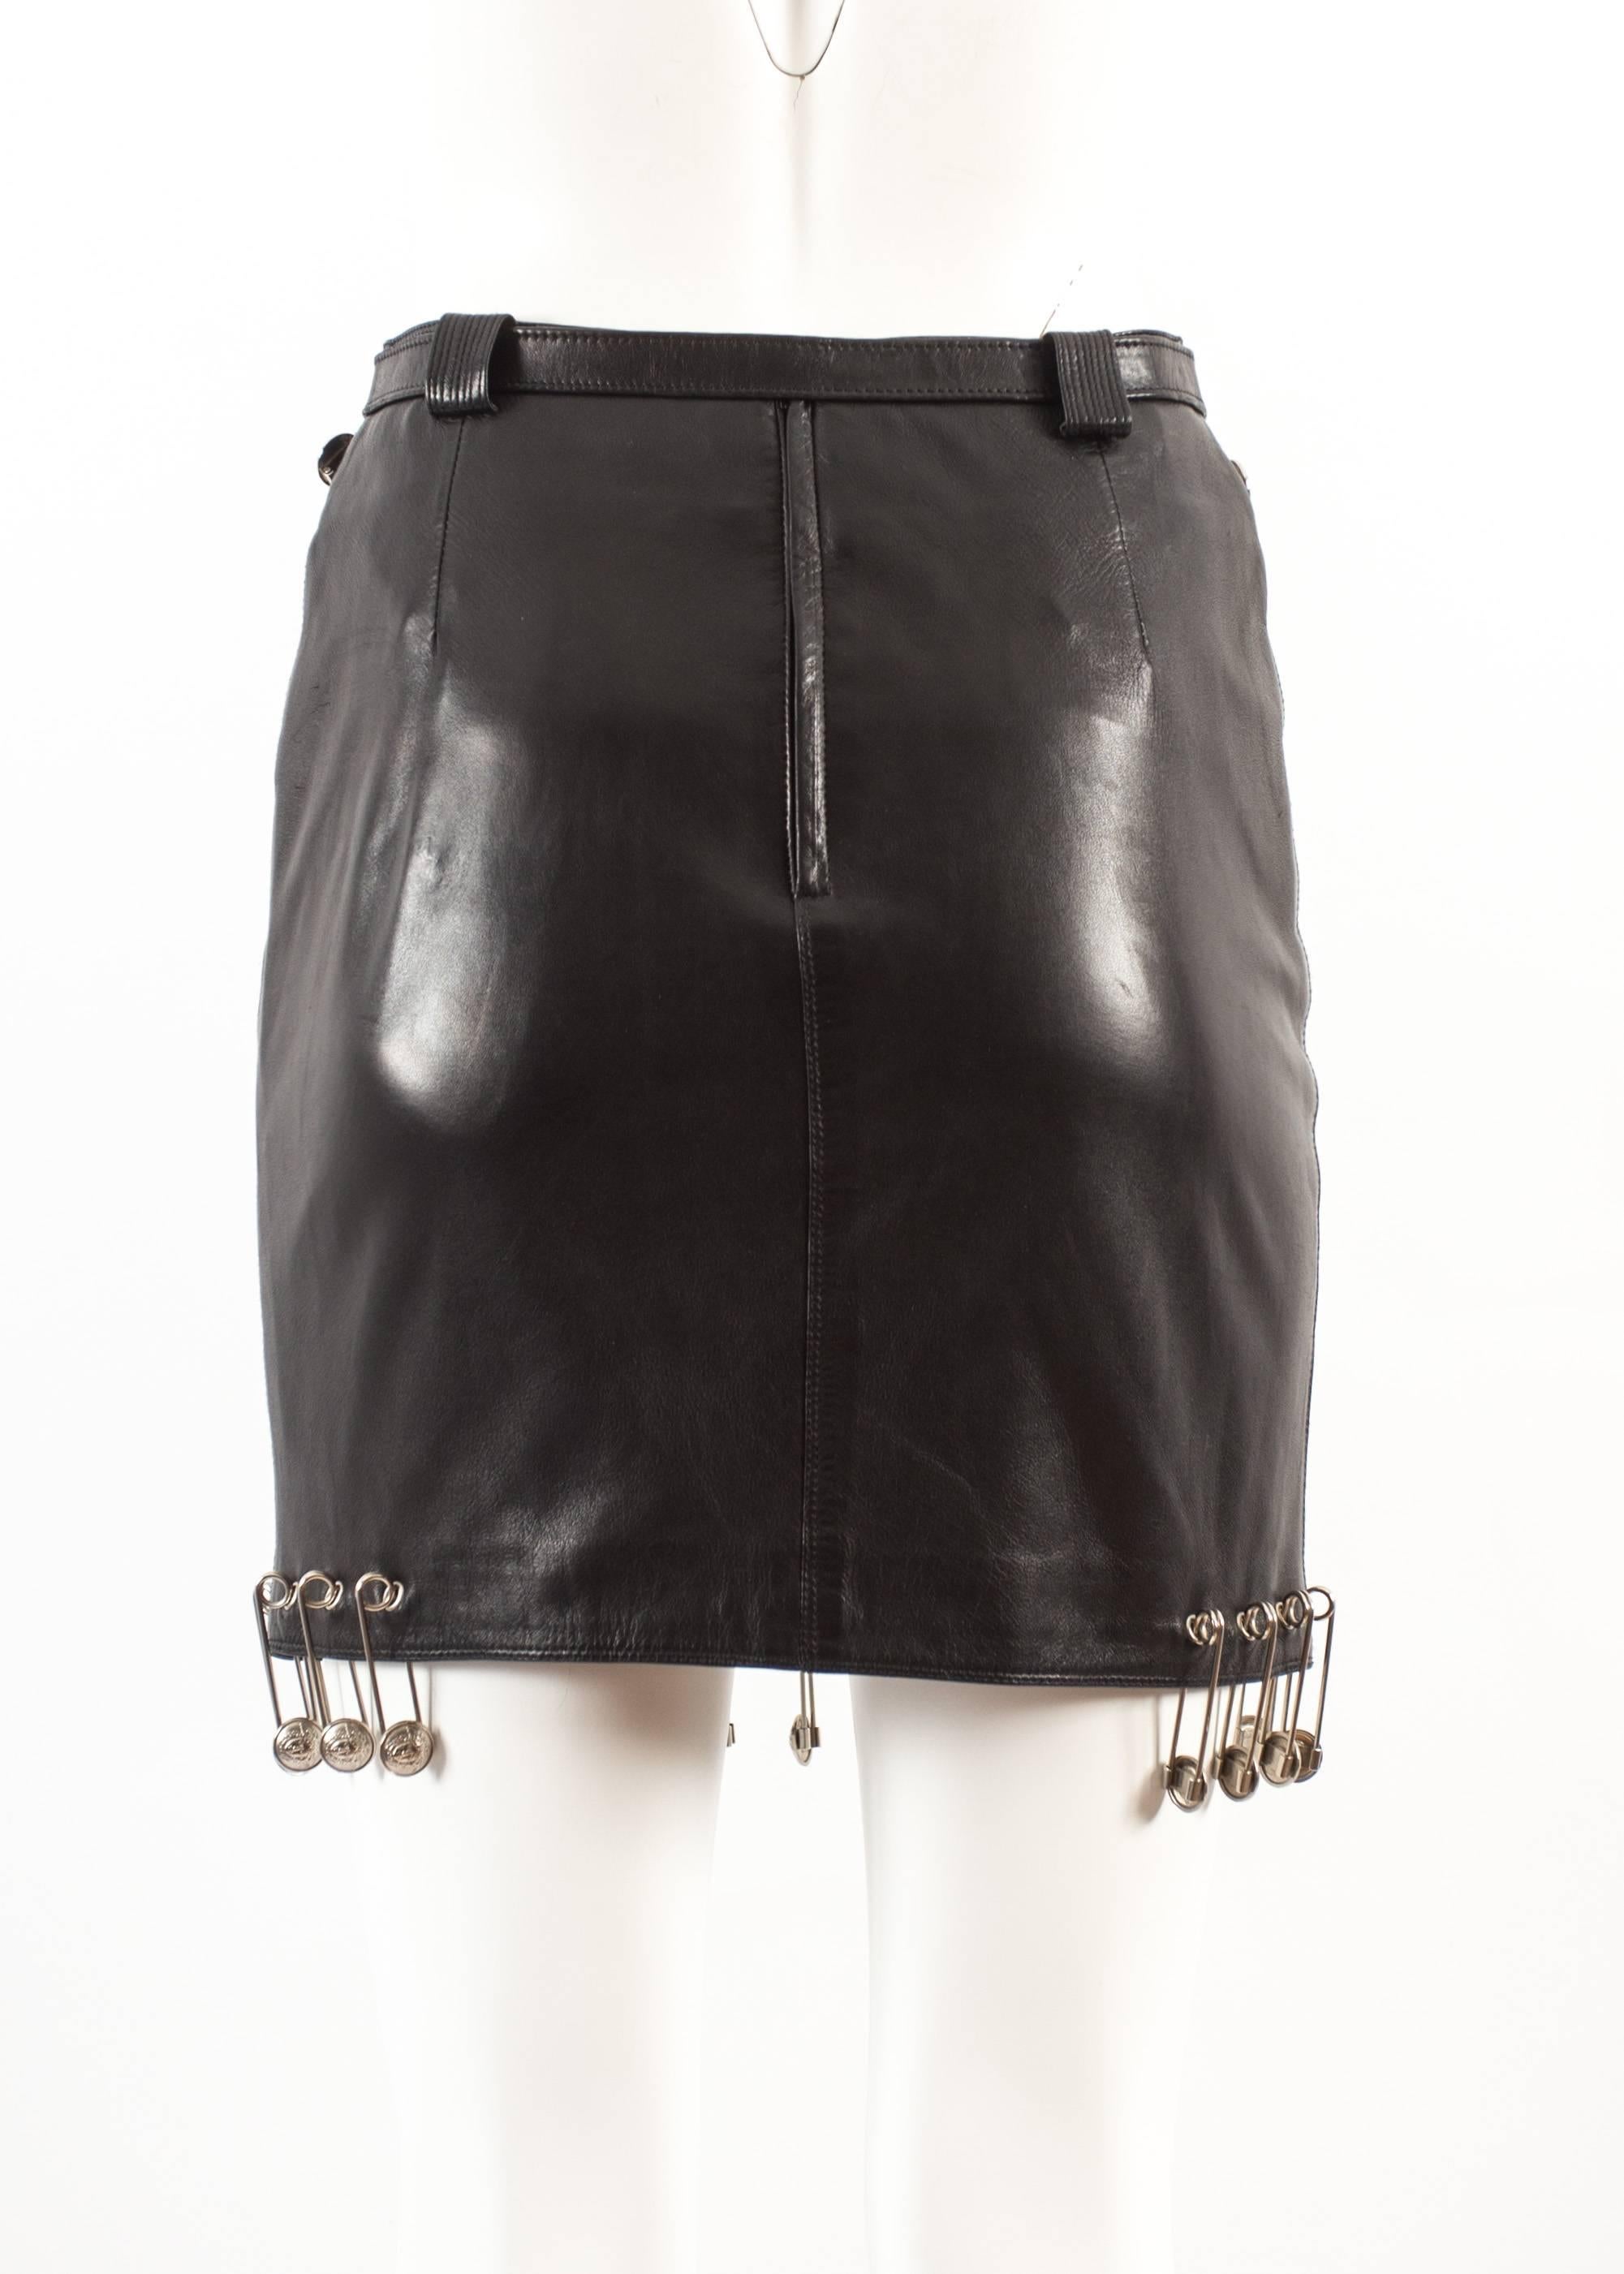 Gianni Versace Spring-Summer 1994 black lambskin leather skirt with safety pins In Excellent Condition For Sale In London, GB